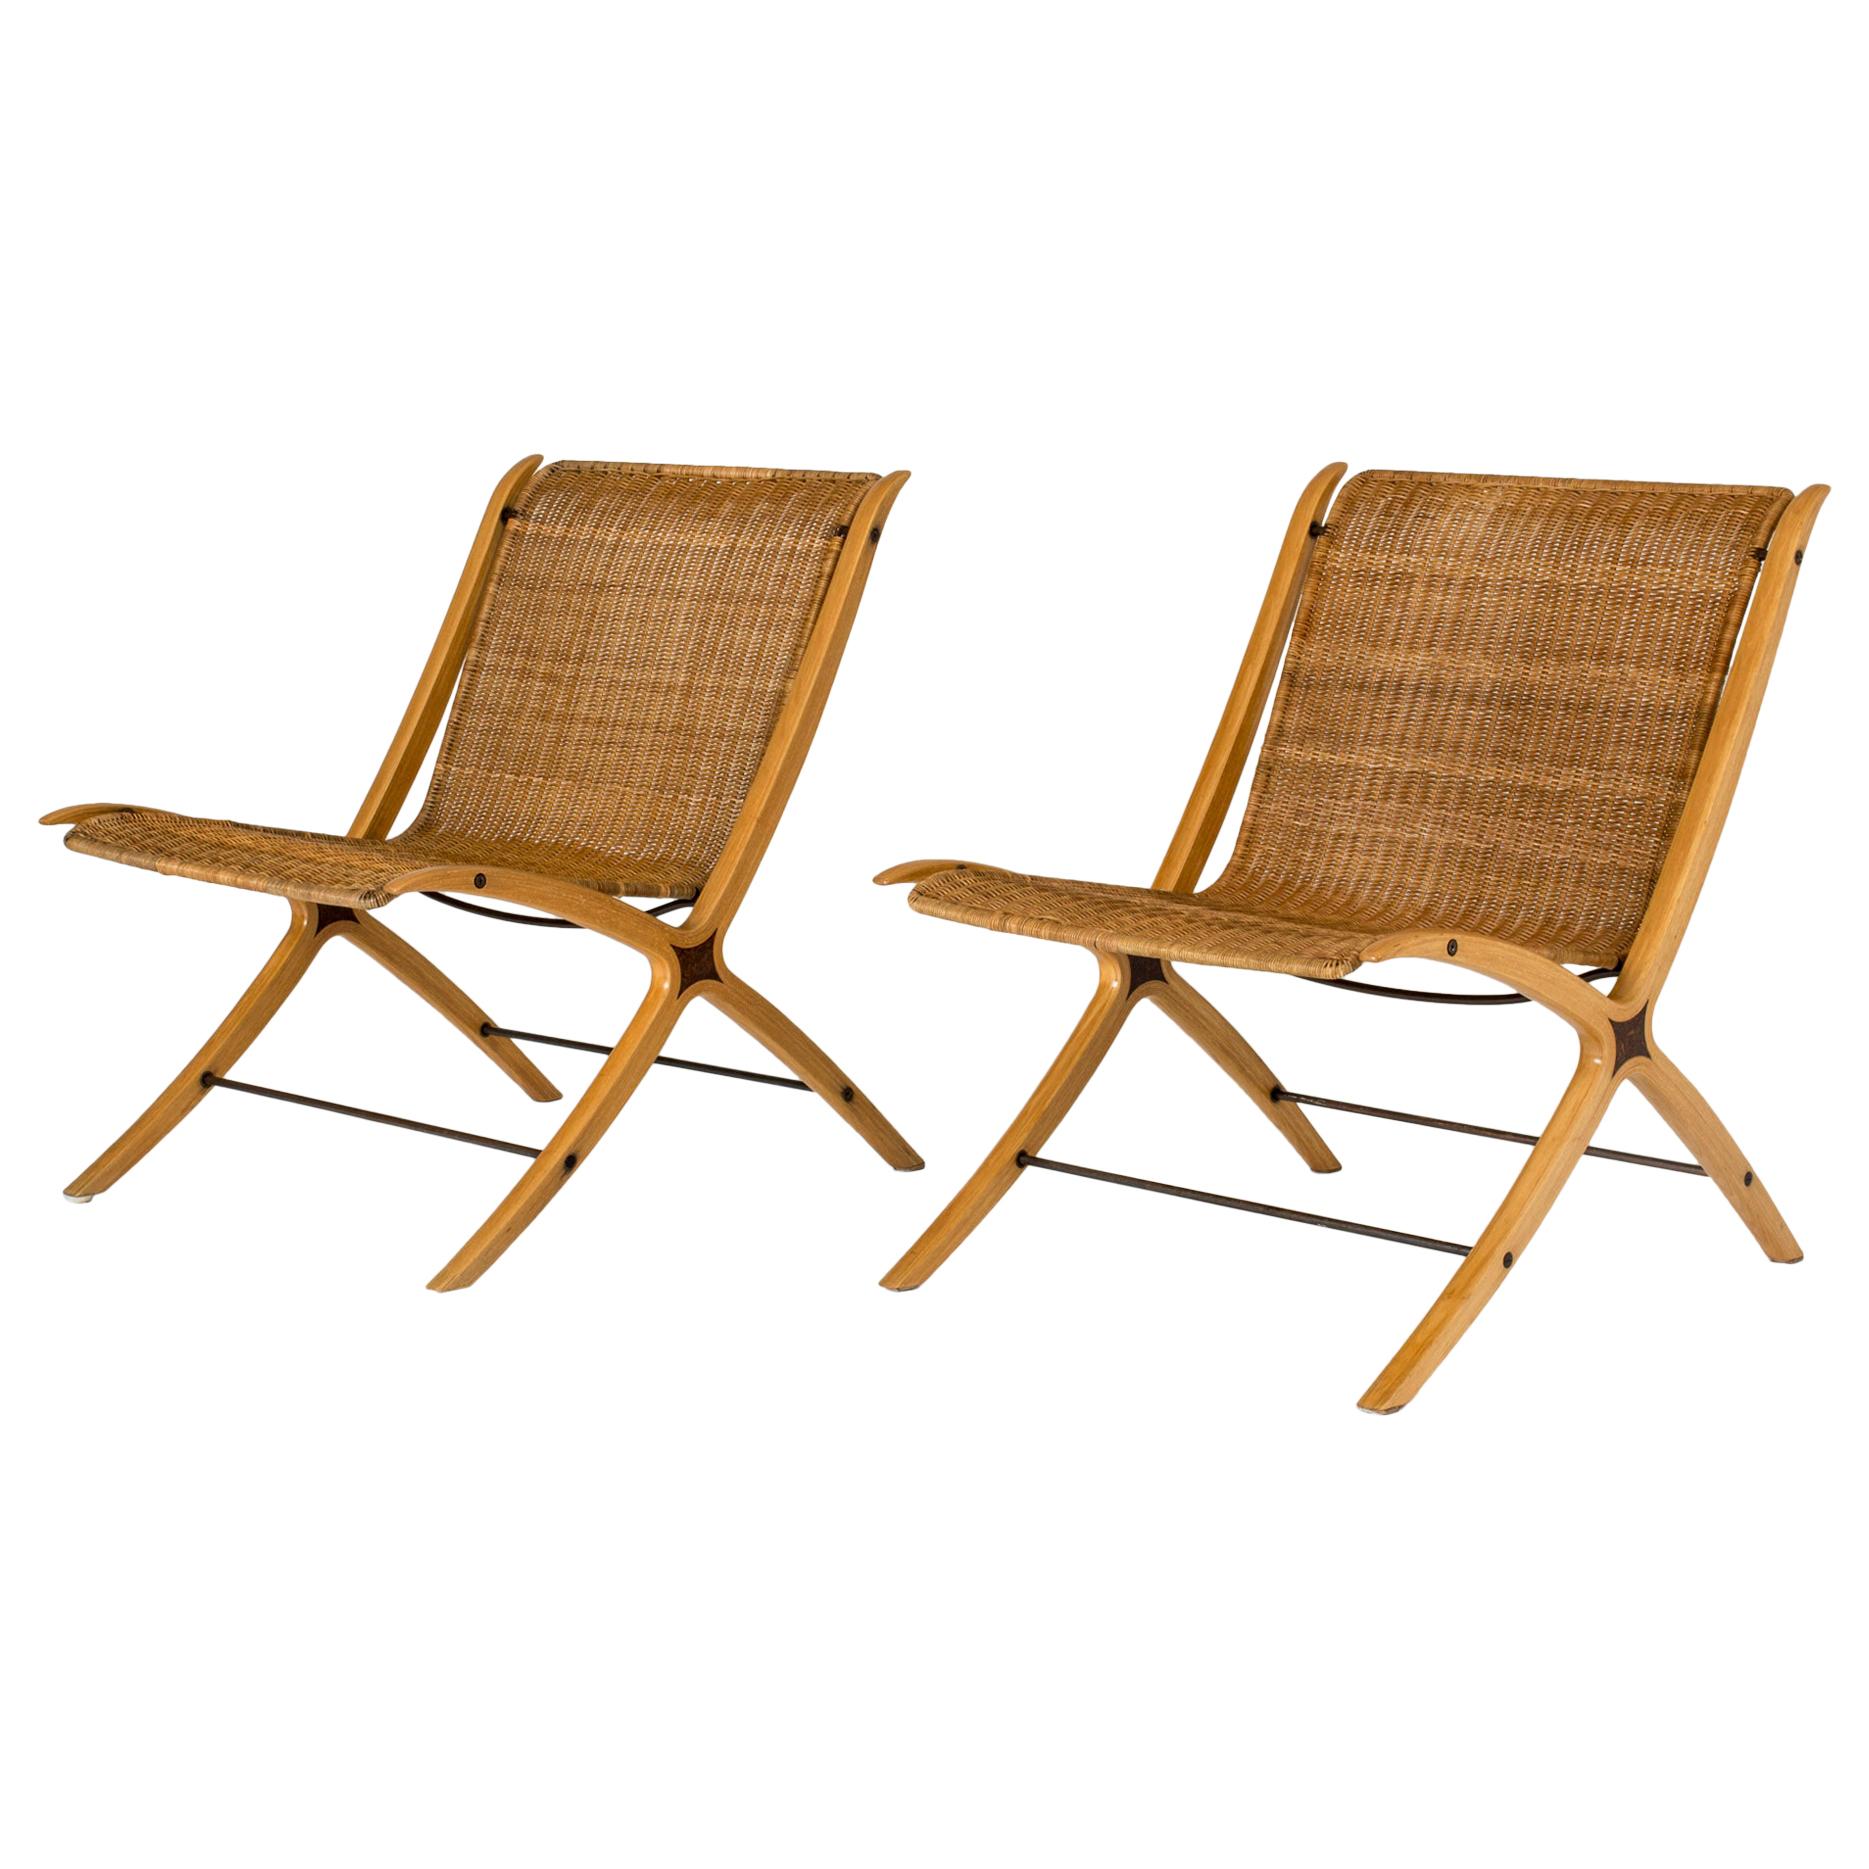 Pair of “X” lounge chairs by Peter Hvidt and Orla Møllgaard